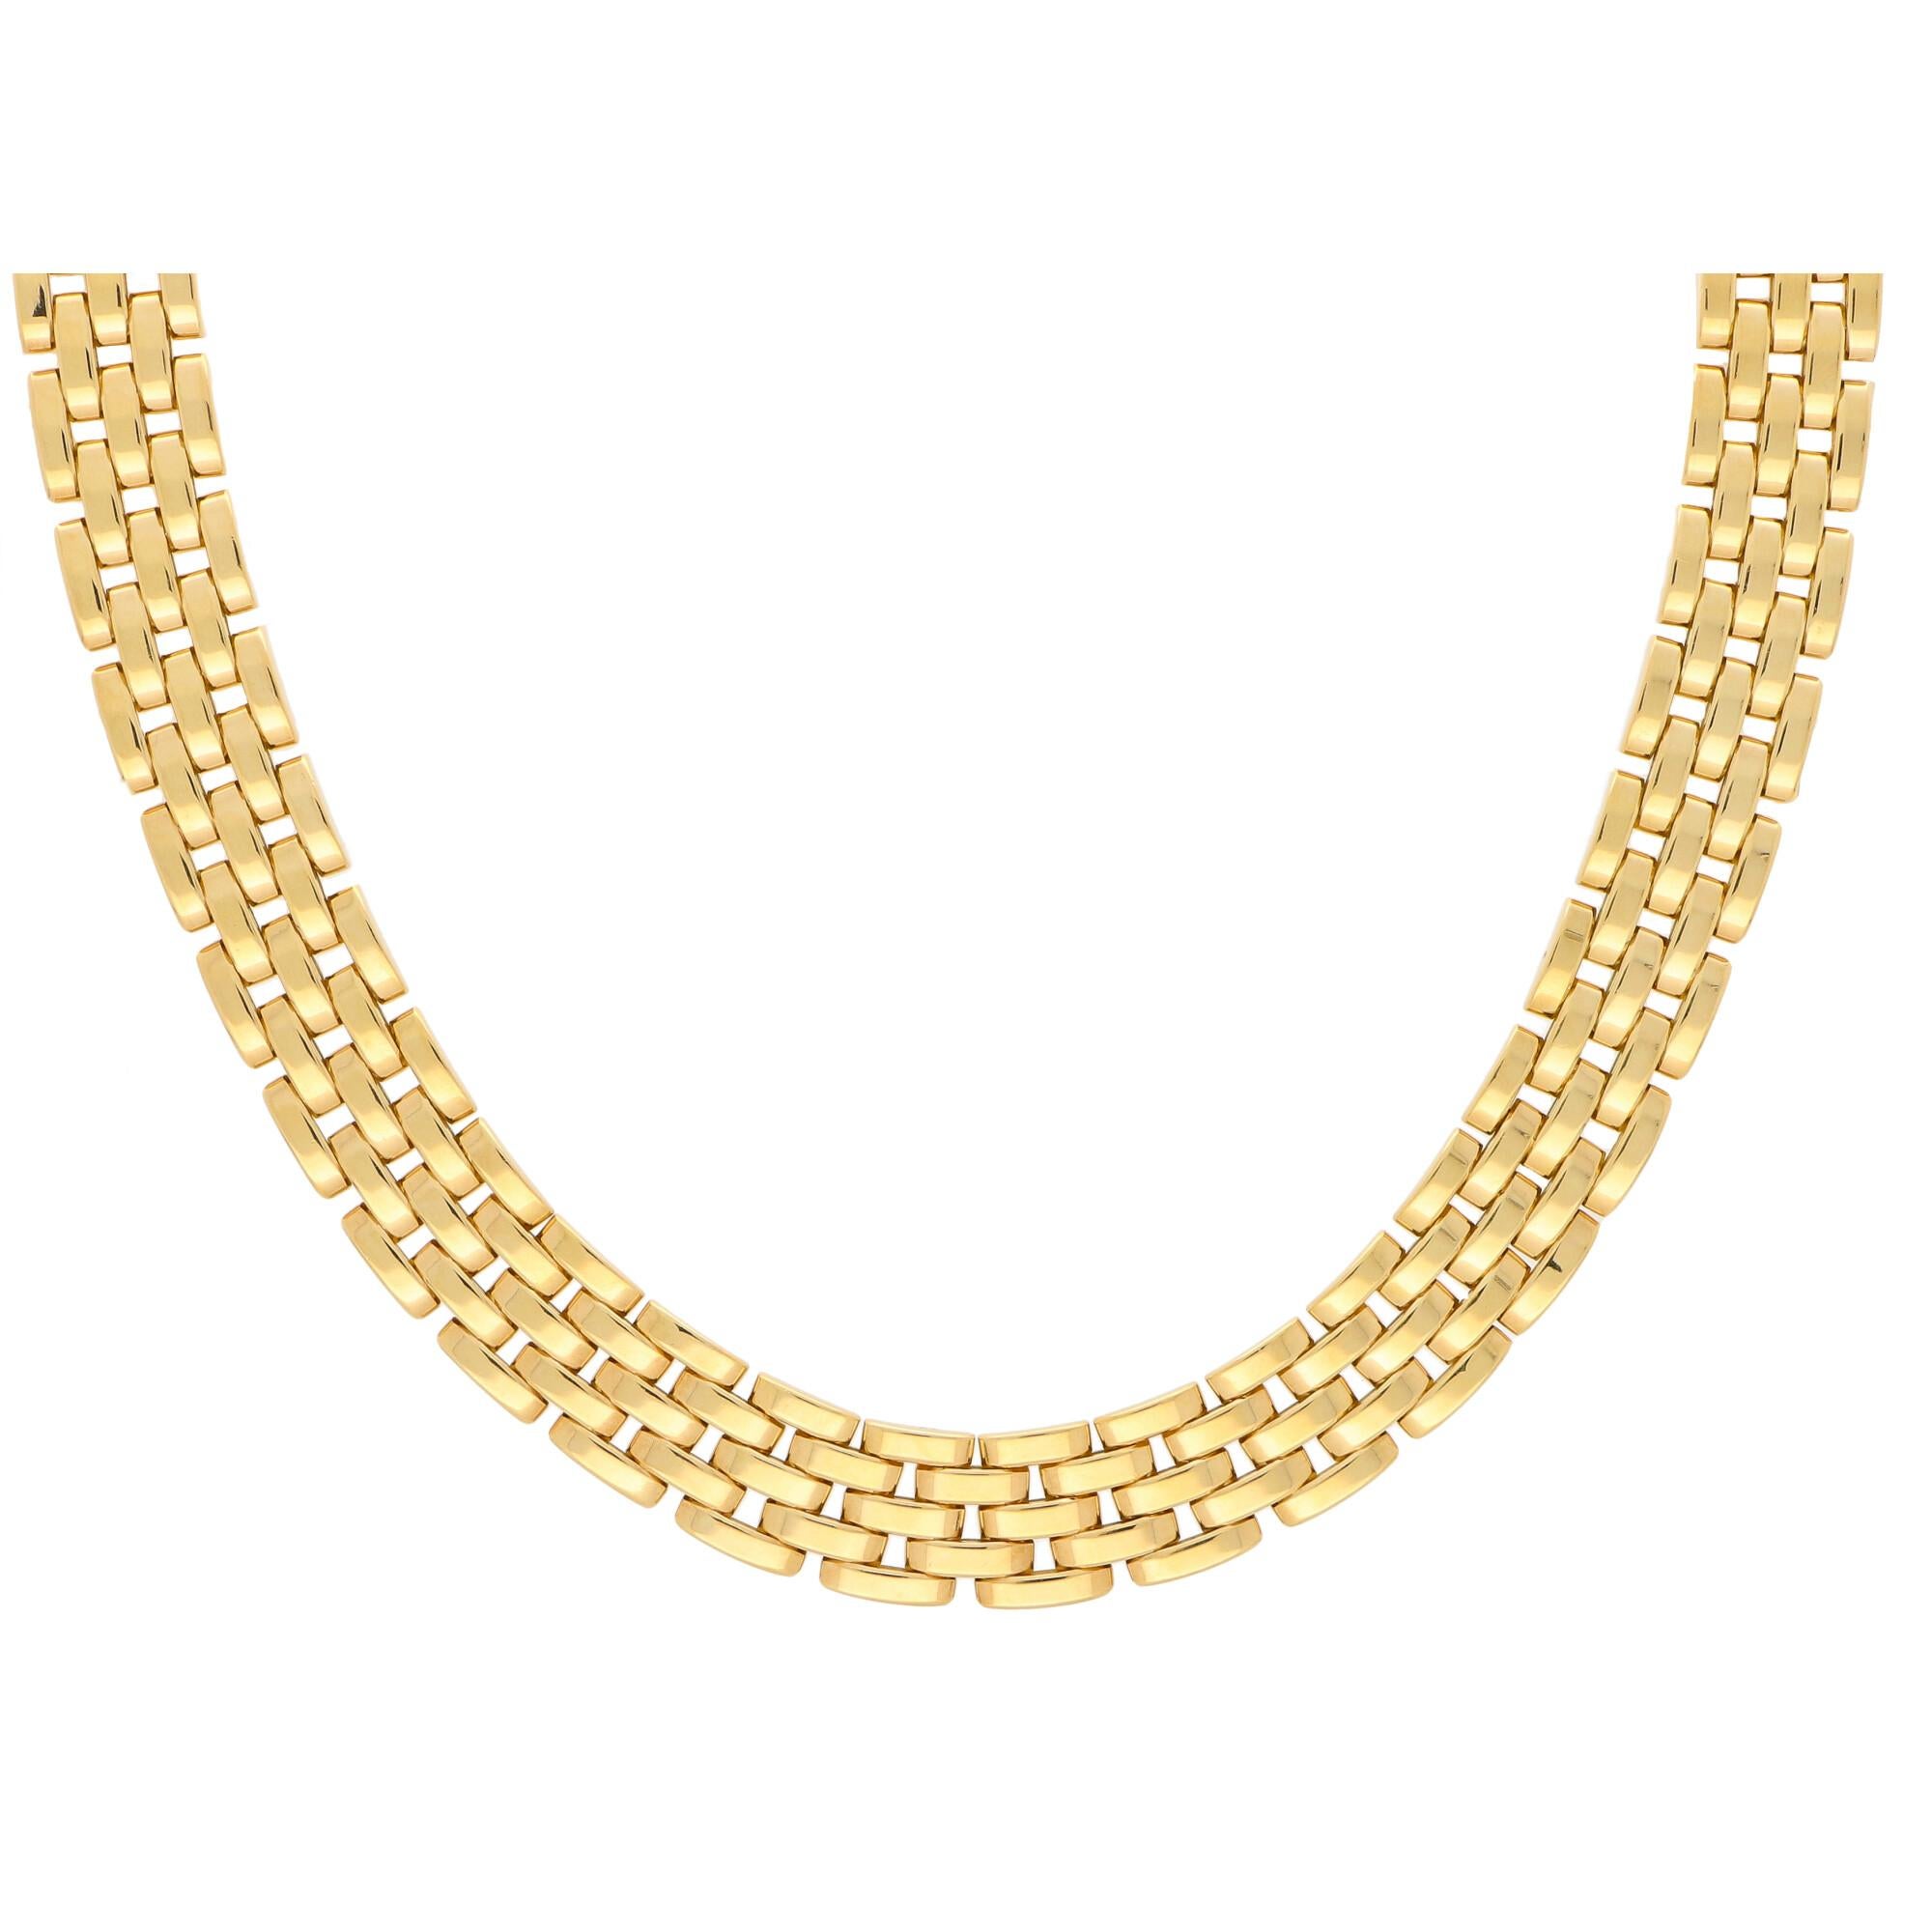 Modern Vintage Cartier Maillon Panthère Five Row Necklace in 18k Yellow Gold